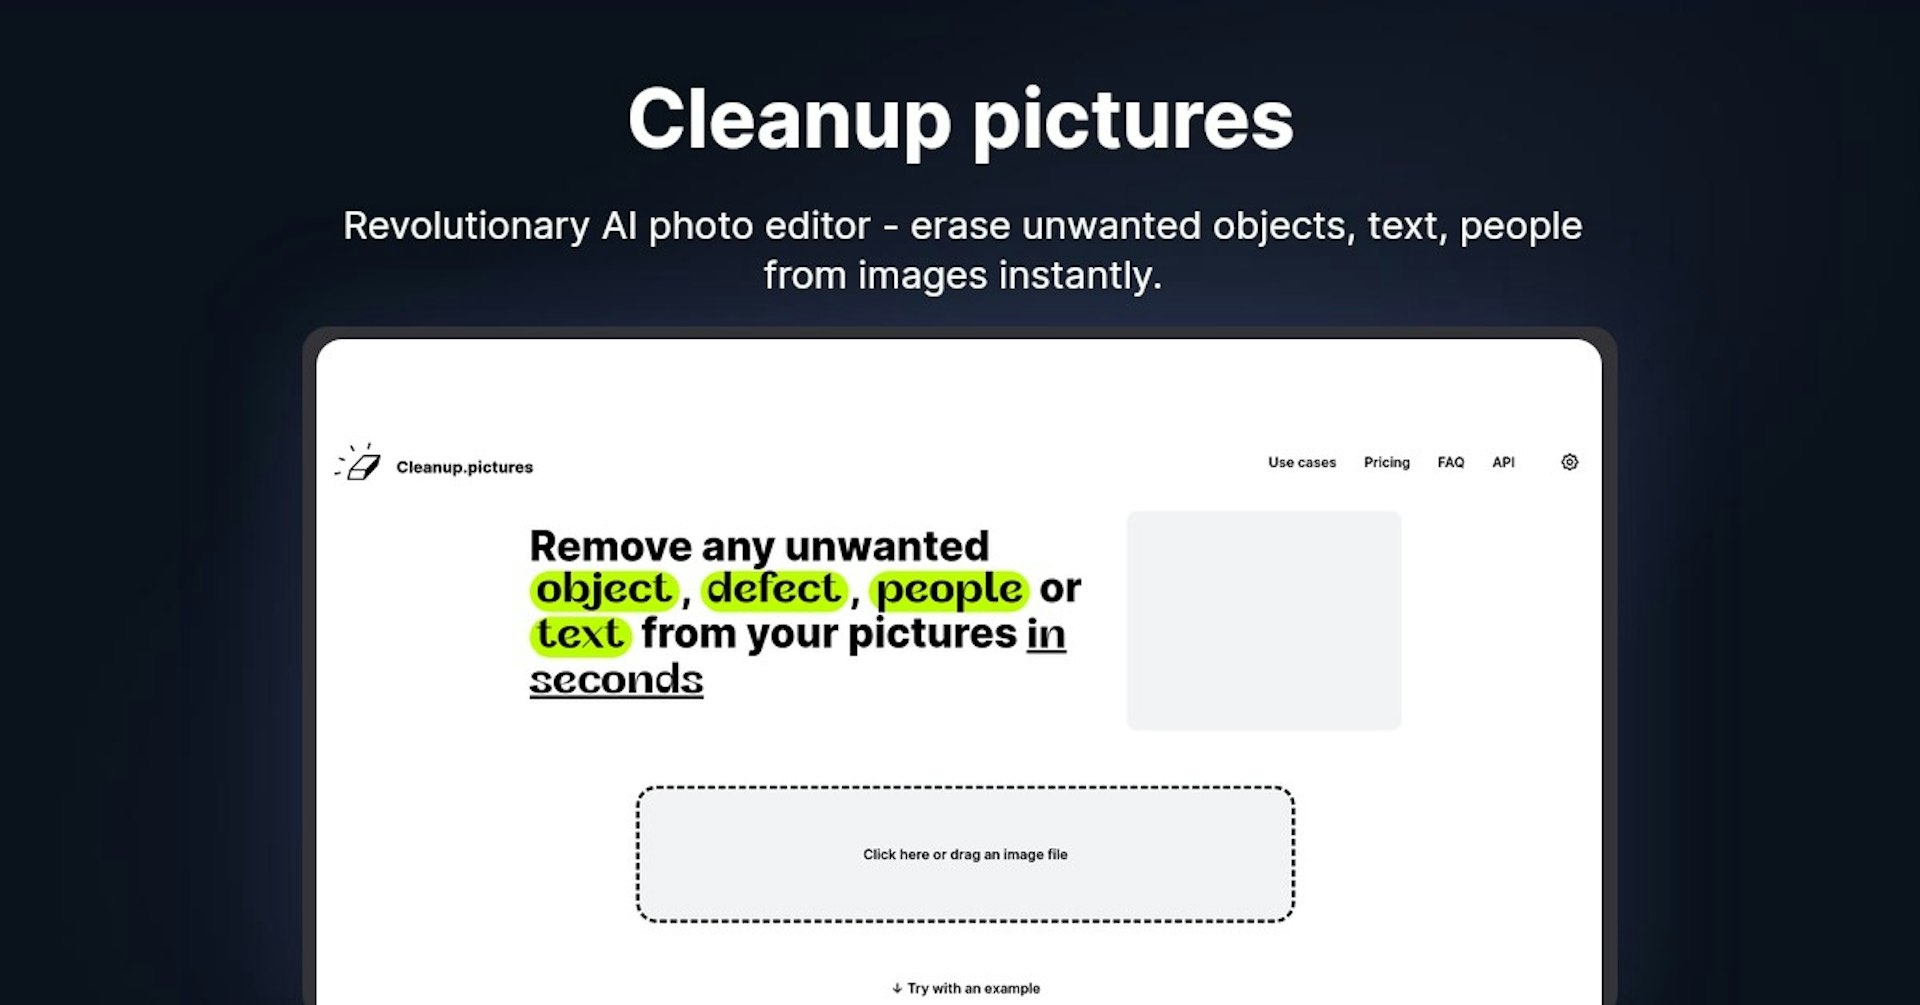 Cleanup pictures